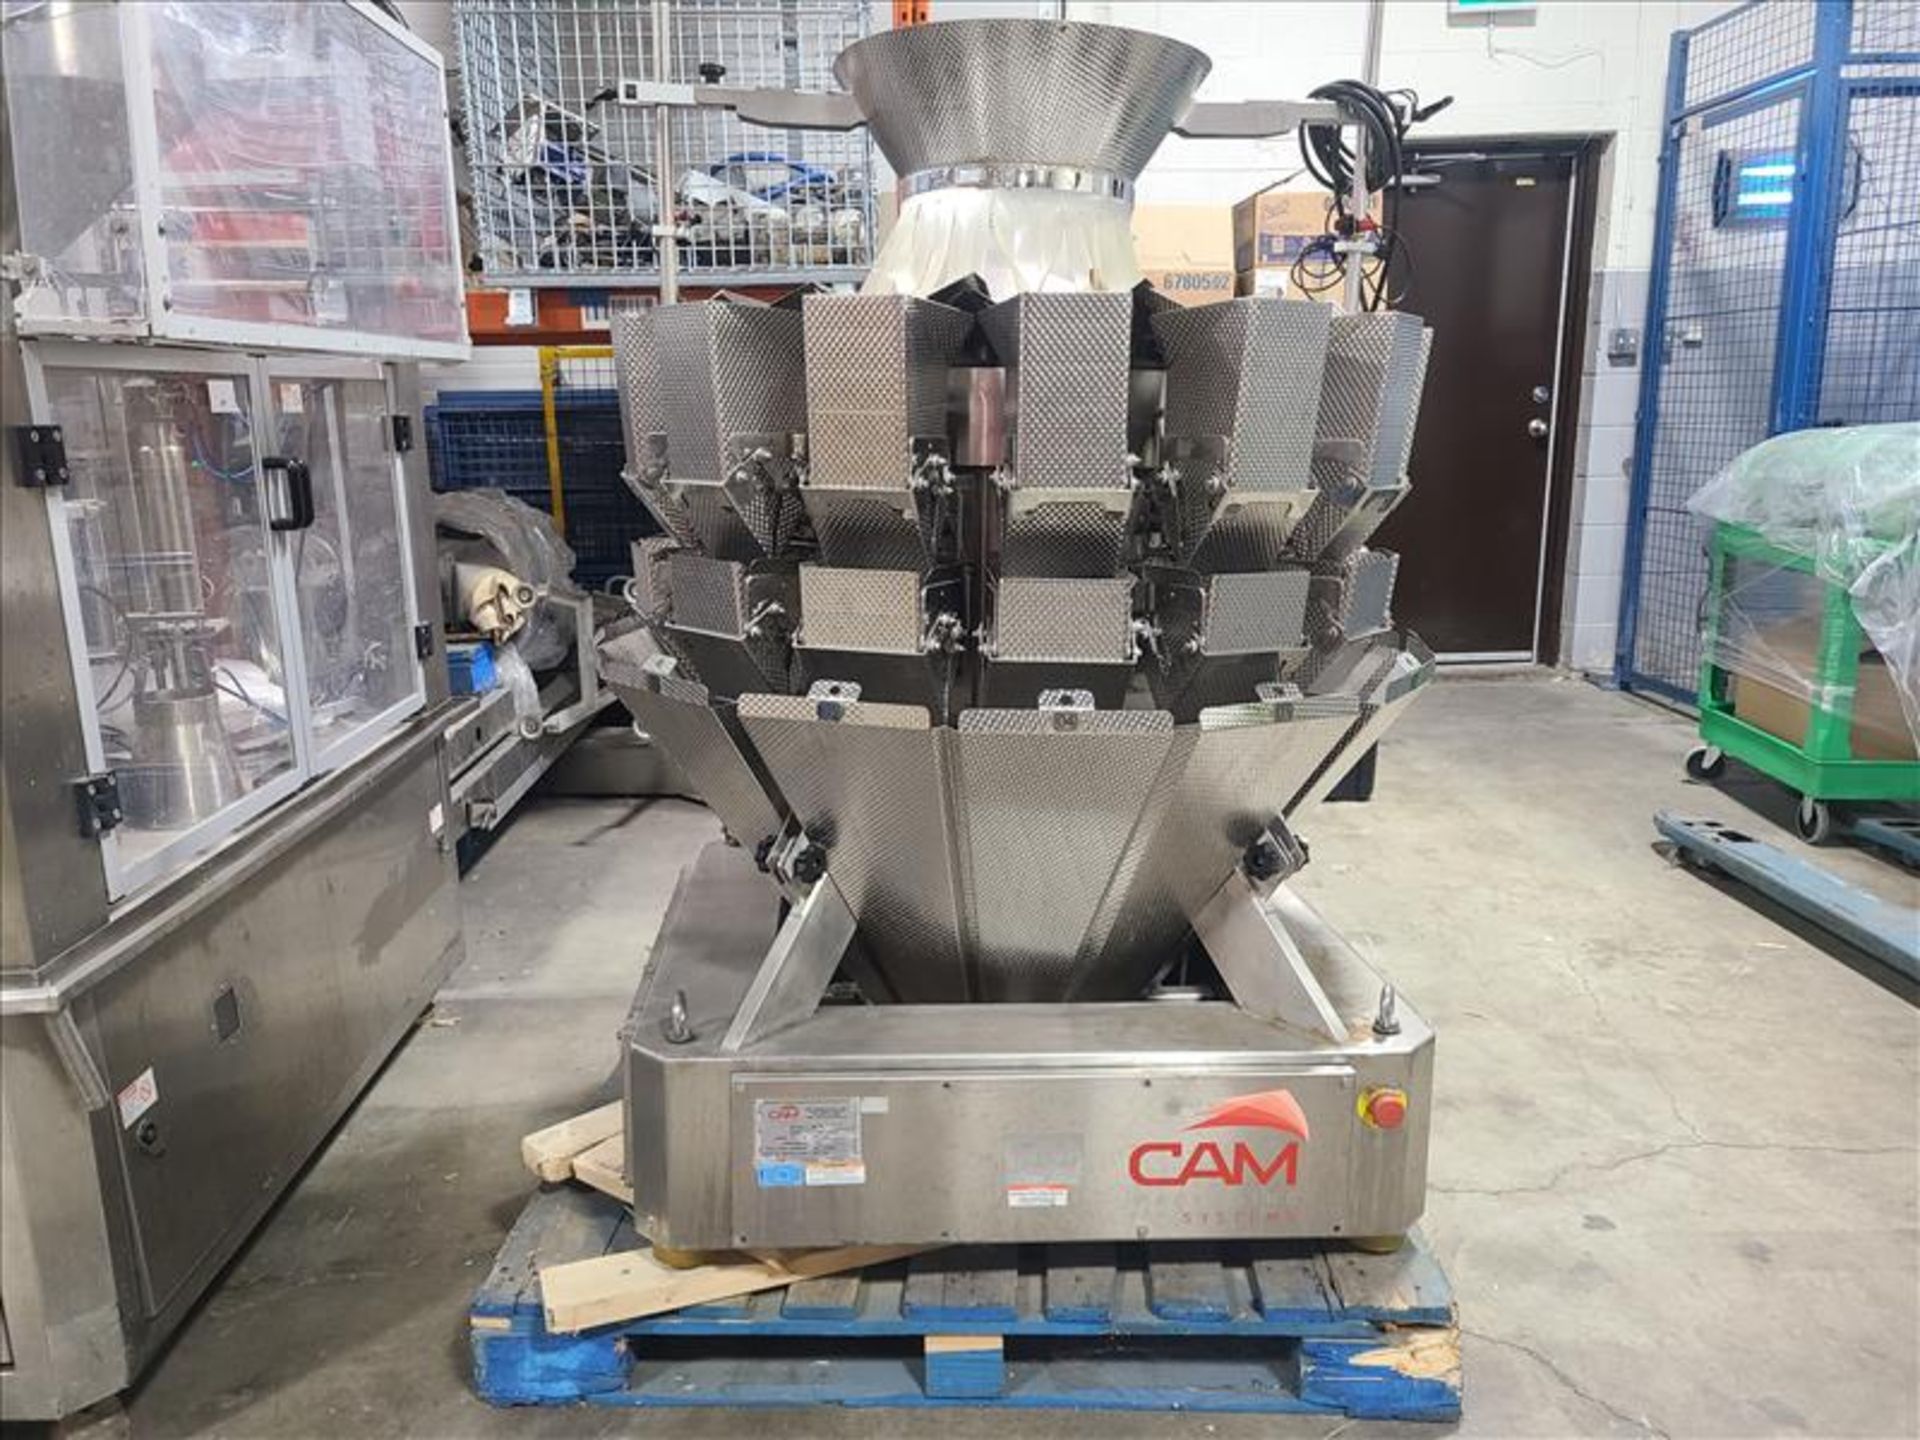 CAM Packaging Systems Standup Bagger Filling System, mod. 8-200A, ser. no. 1708004PB, 220 volts, 3 - Image 11 of 14